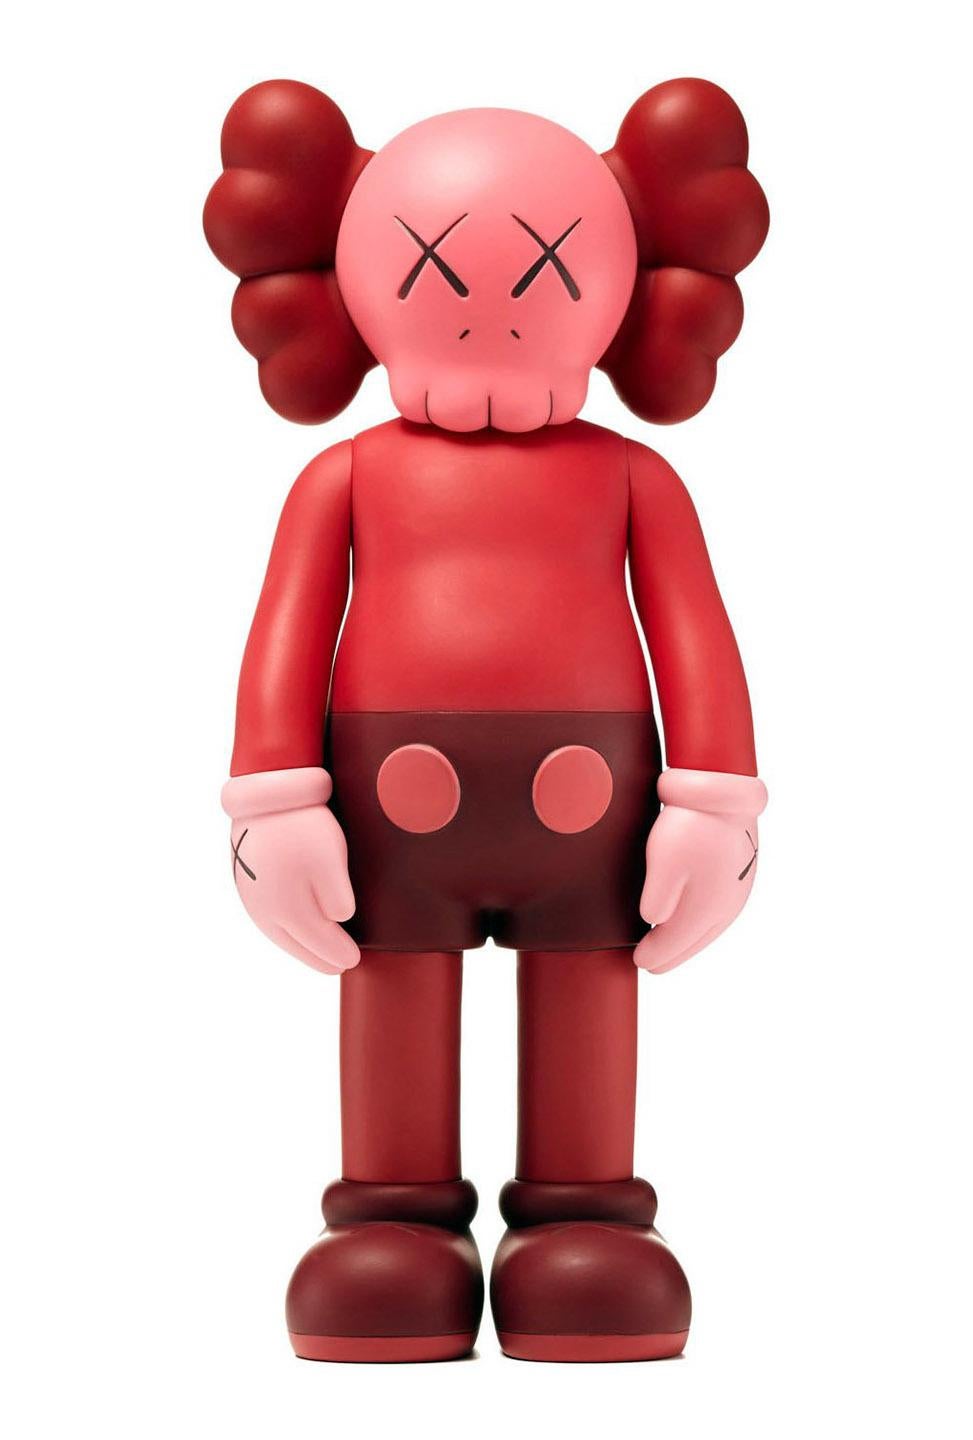 KAWS Companion 2016: set of 4 works:
KAWS Brown full body and flayed; & KAWS Red Blush full body & flayed, 2016 - each, new and sealed in their original packaging. 

These iconic KAWS figures were published by Medicom Japan in conjunction with the